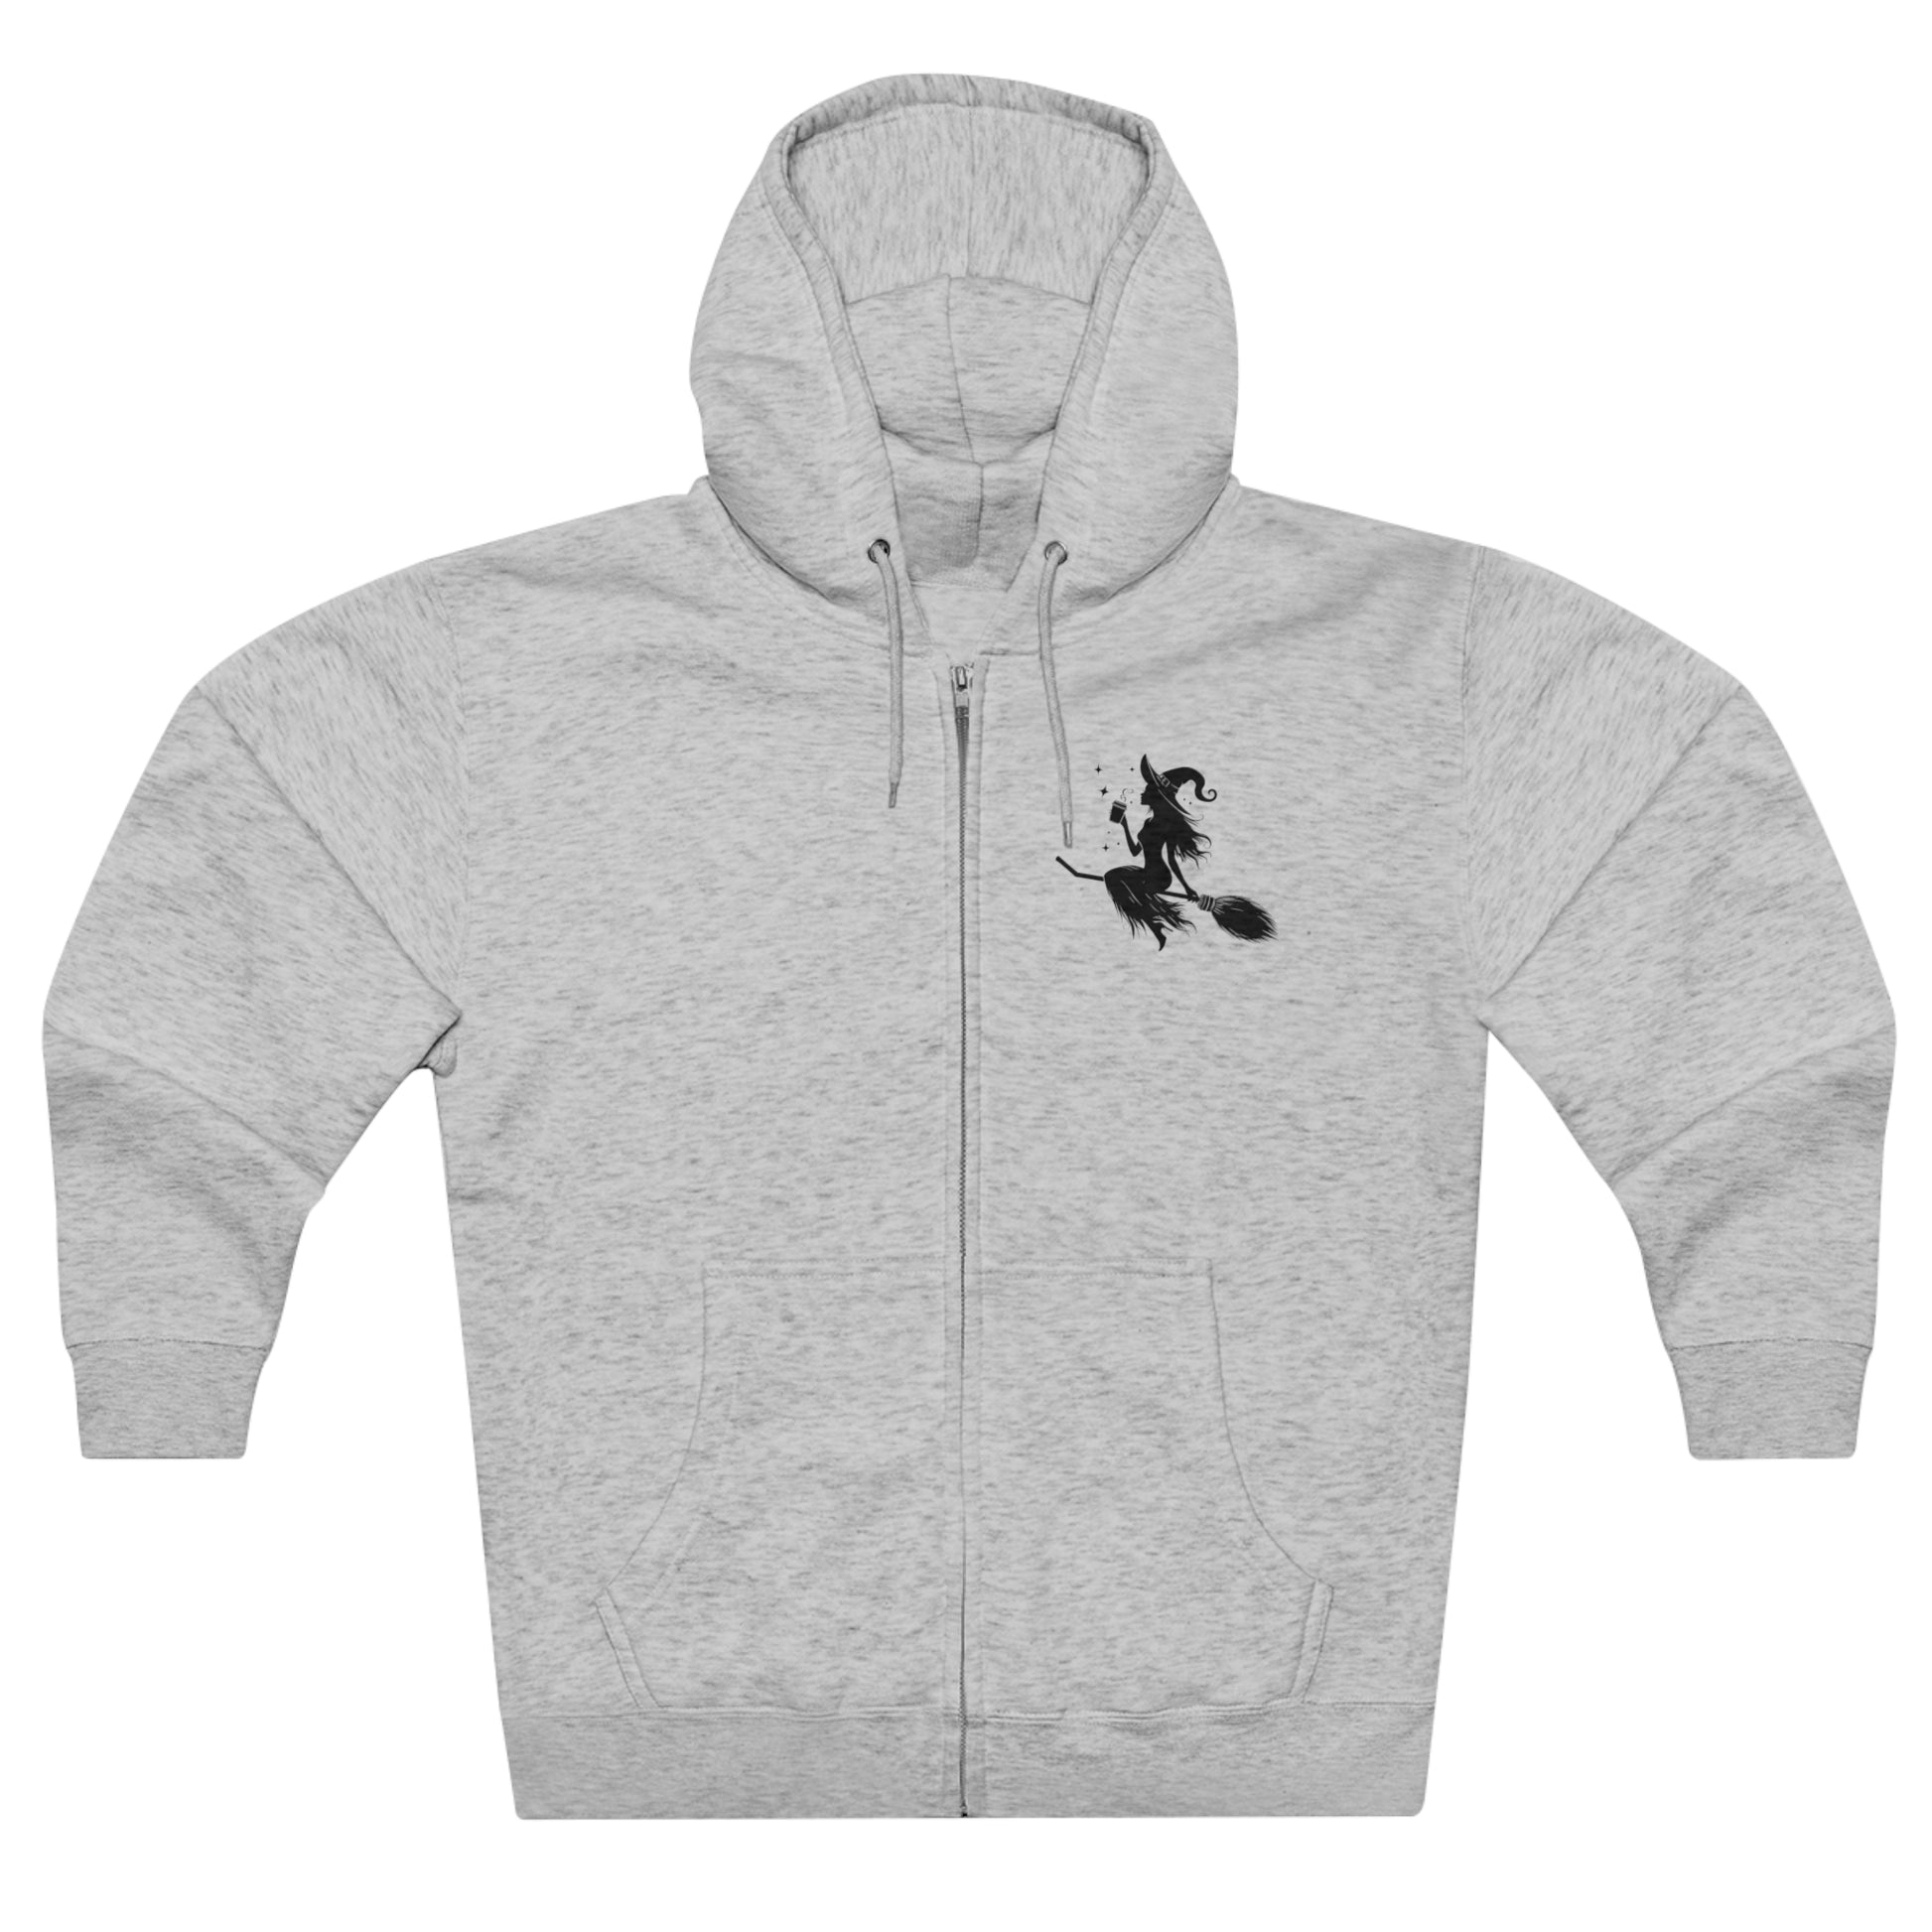 Hoodie: featuring a witch flying with a coffee cup, with a moon in the background. Gray color Hoodie with Black graphics on the front chest, and back.